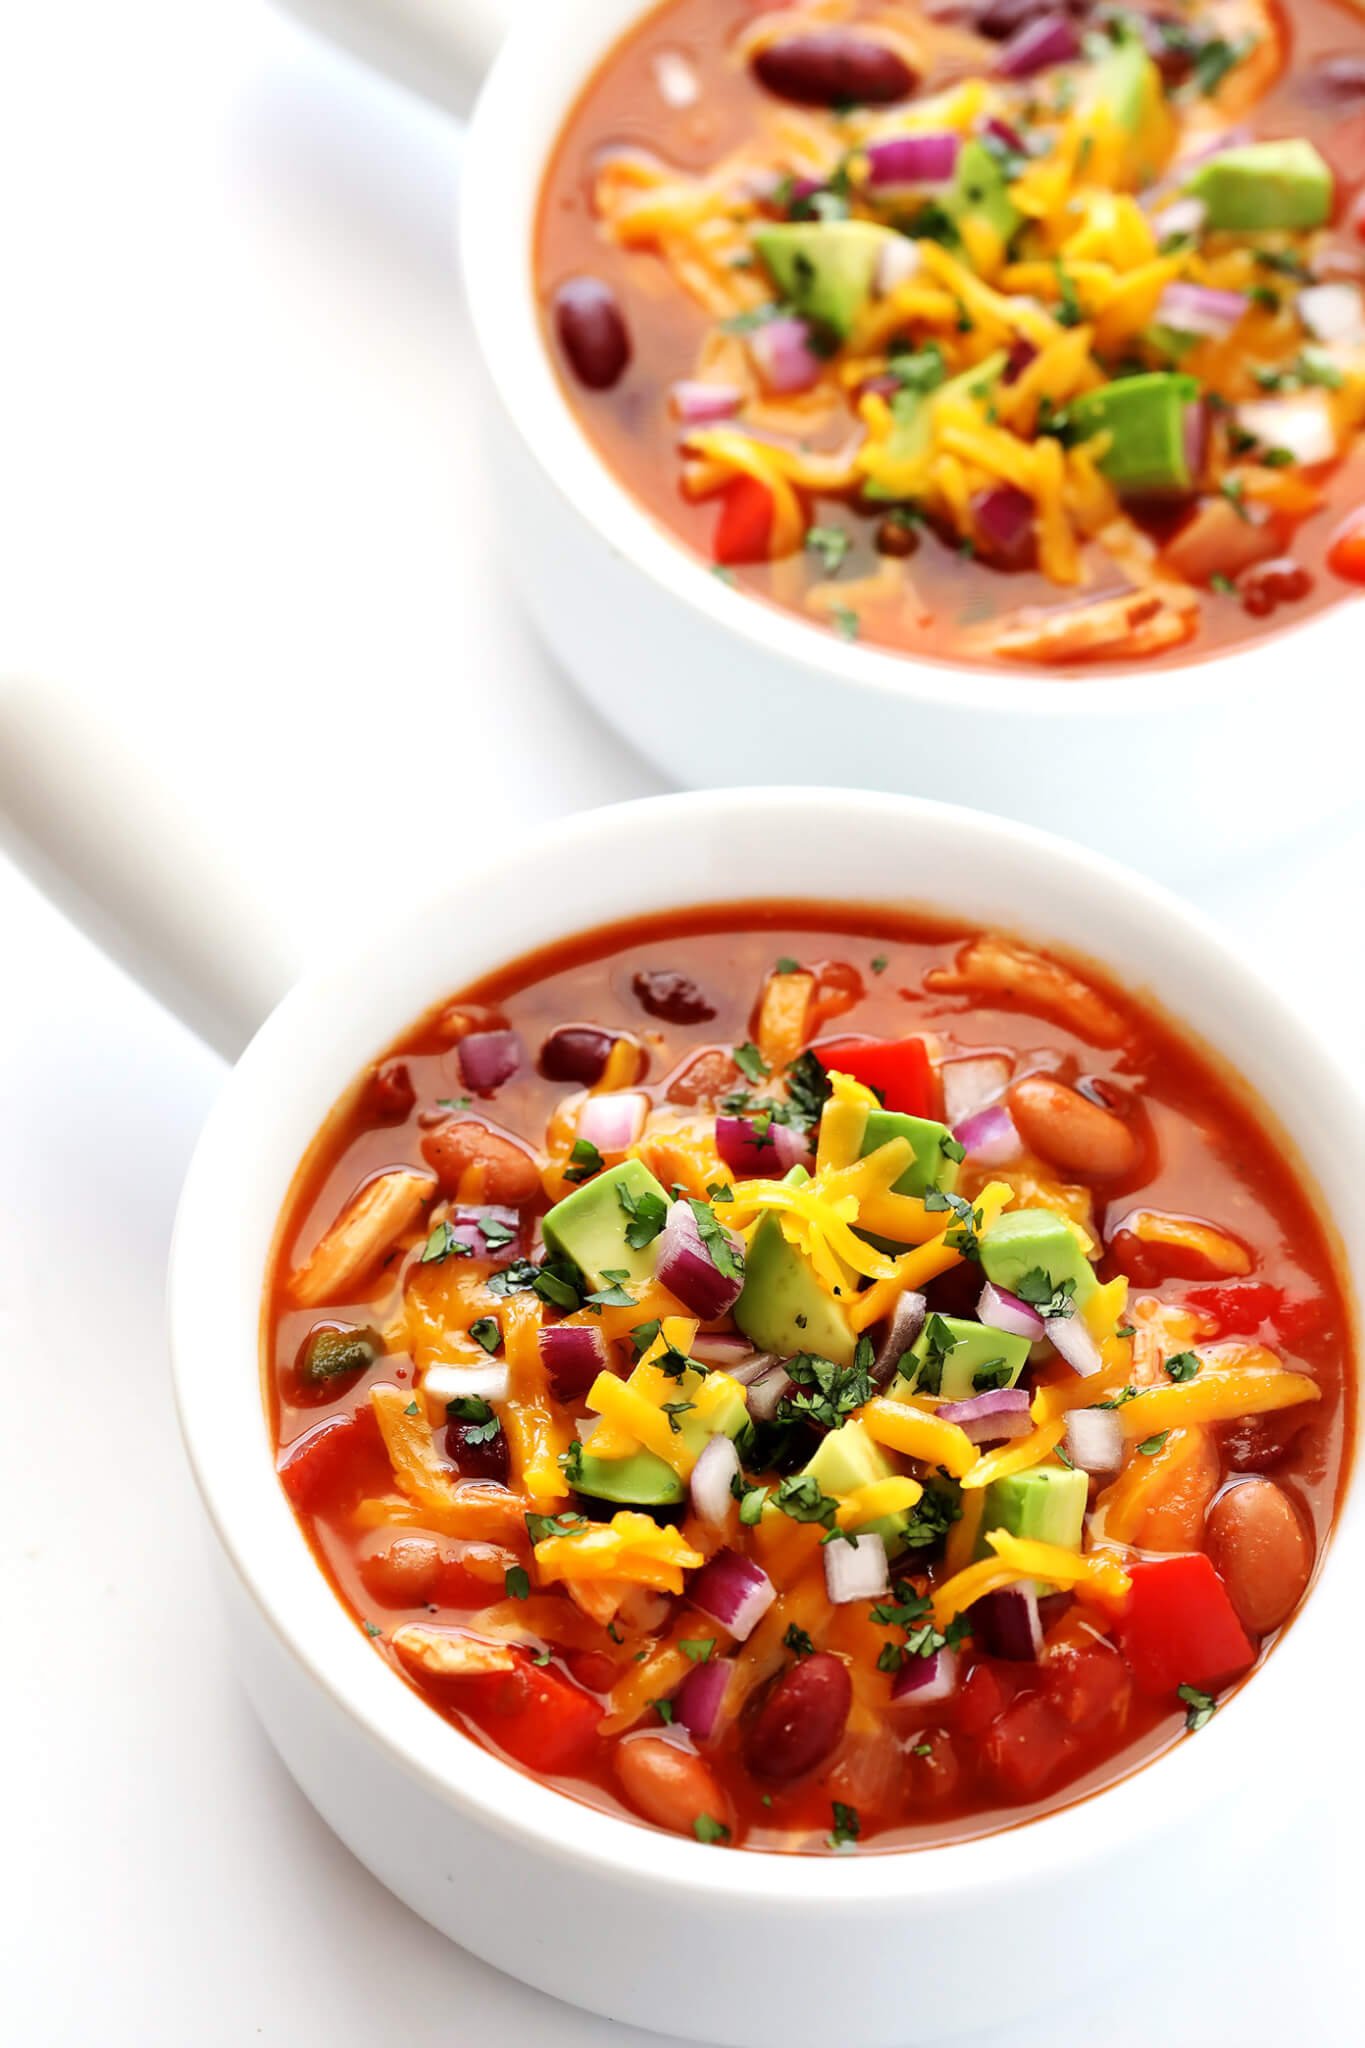 This 20-Minute Chipotle Chicken Chili recipe is quick and easy to prepare, naturally gluten-free, and made with ingredients you can feel good about. Feel free to top with avocado, cheese, cilantro, or whatever sounds good. And of course, sub in ground turkey or beef in place of chicken, if you'd like.